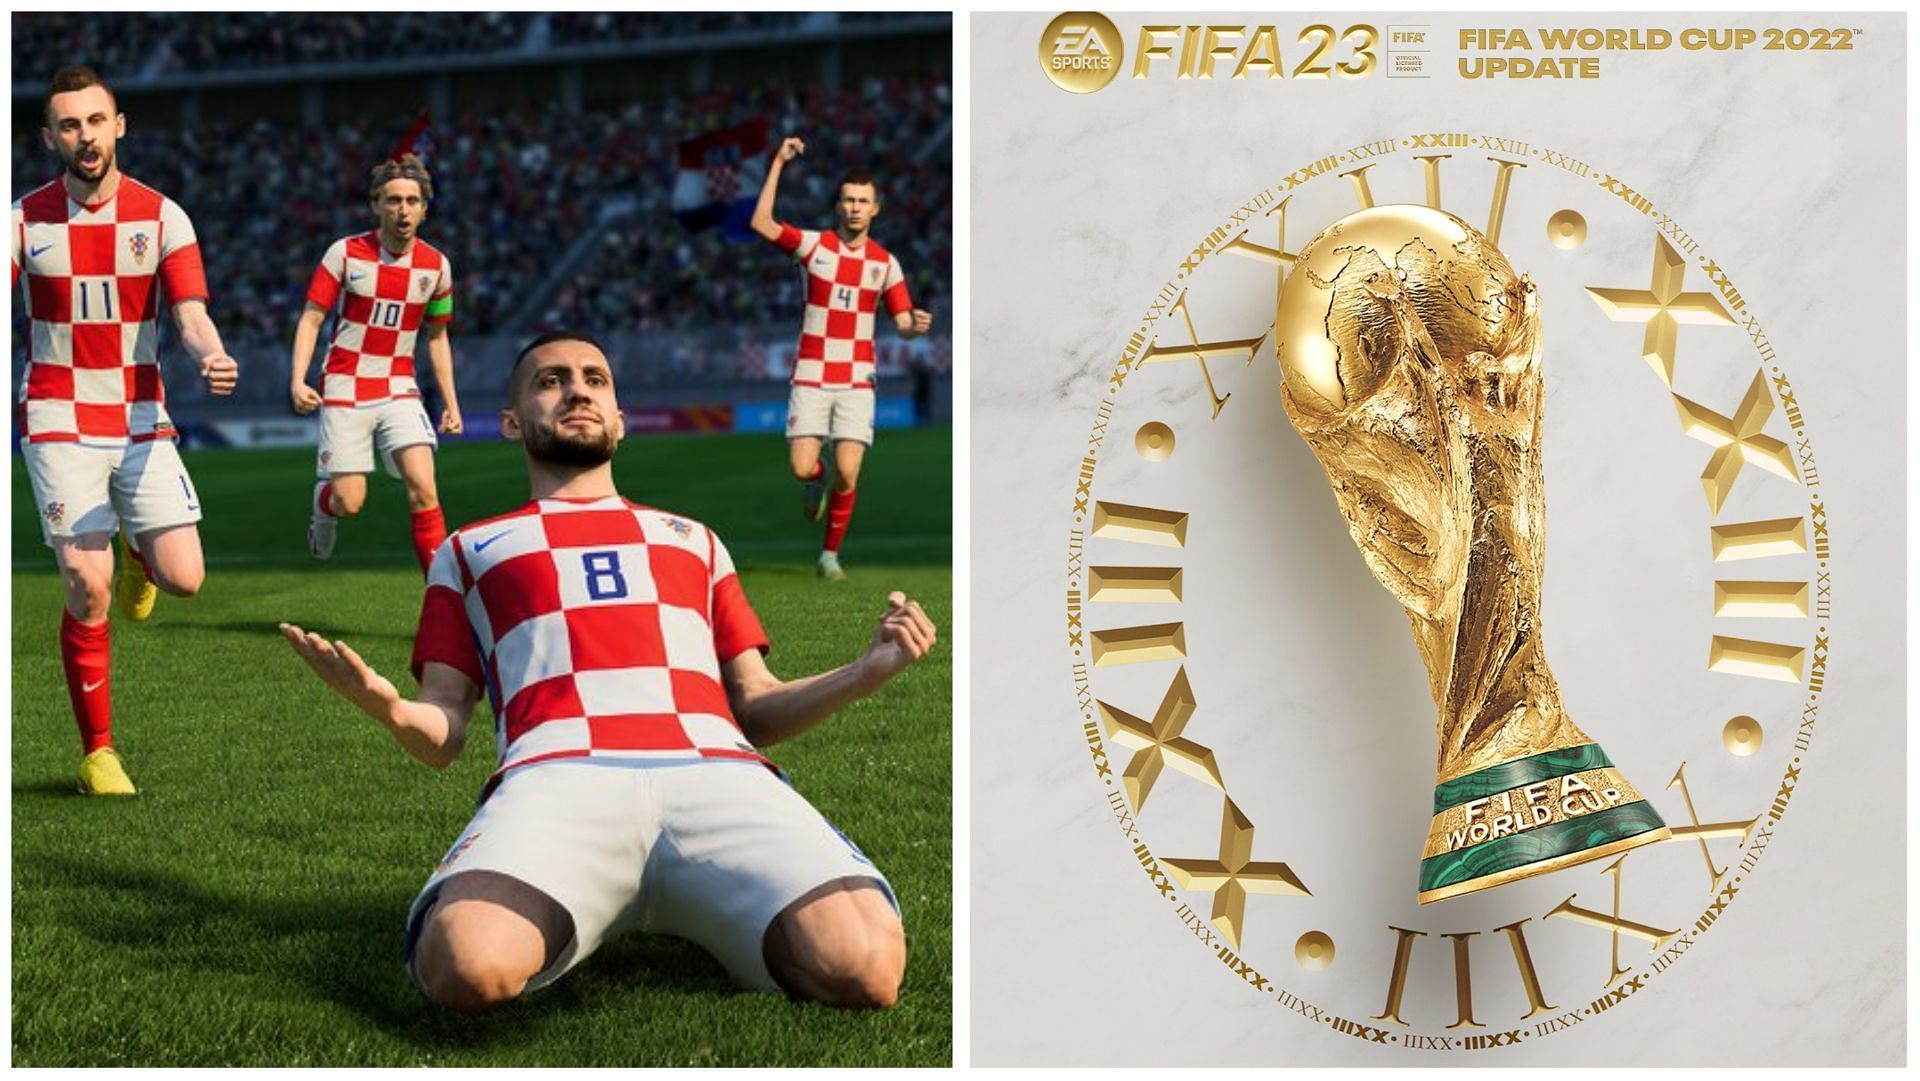 Croatia are amongst the dark horses in the FIFA World Cup 2022 (Images via EA Sports)